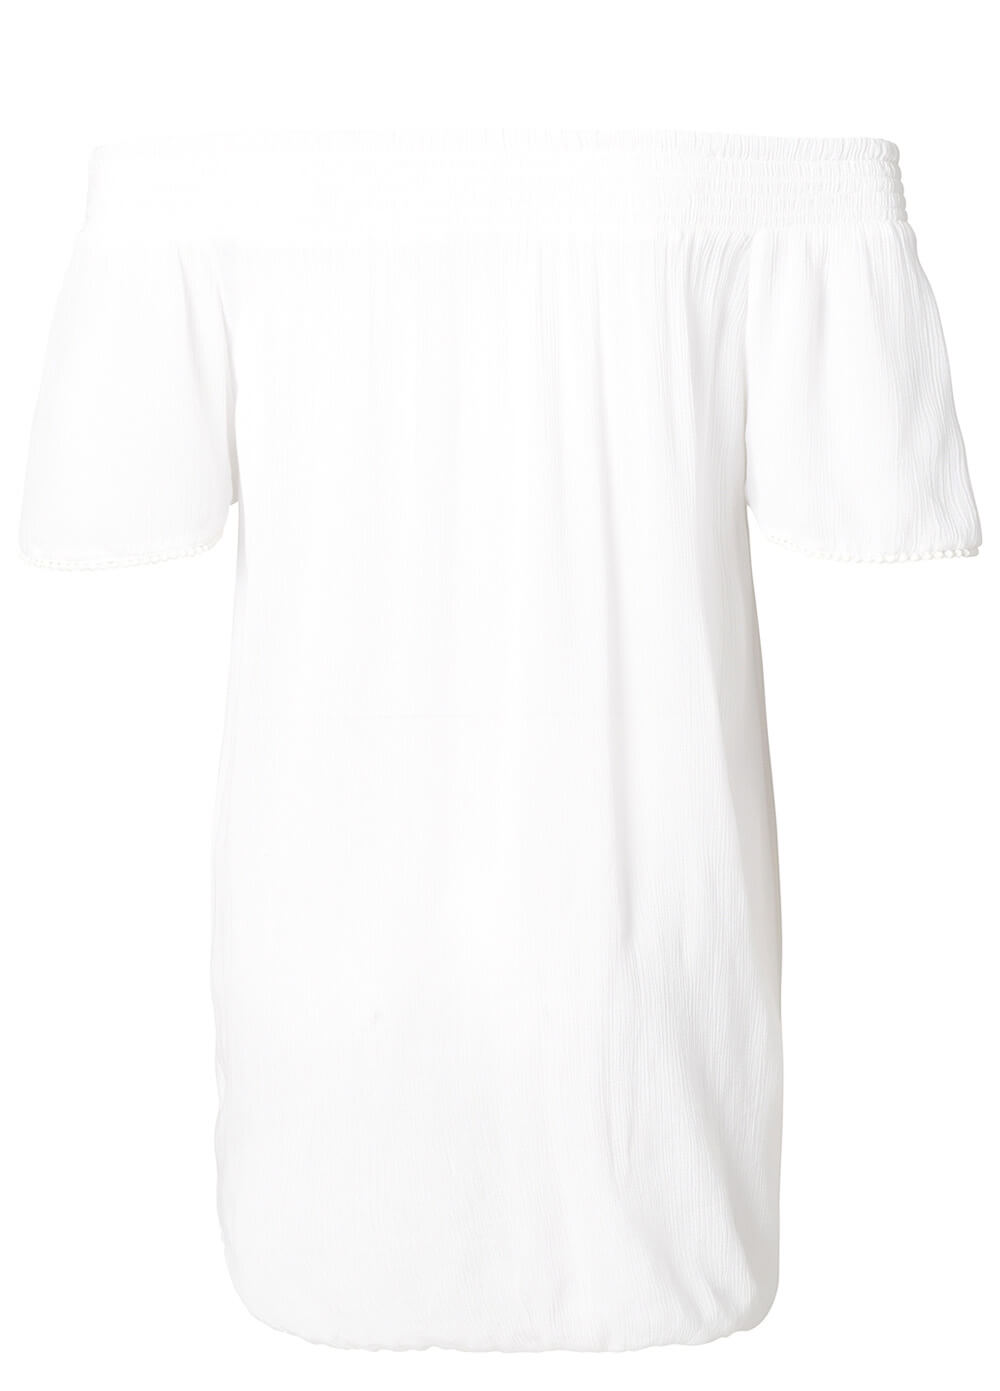 Off Shoulder Maternity Blouse in White by Esprit